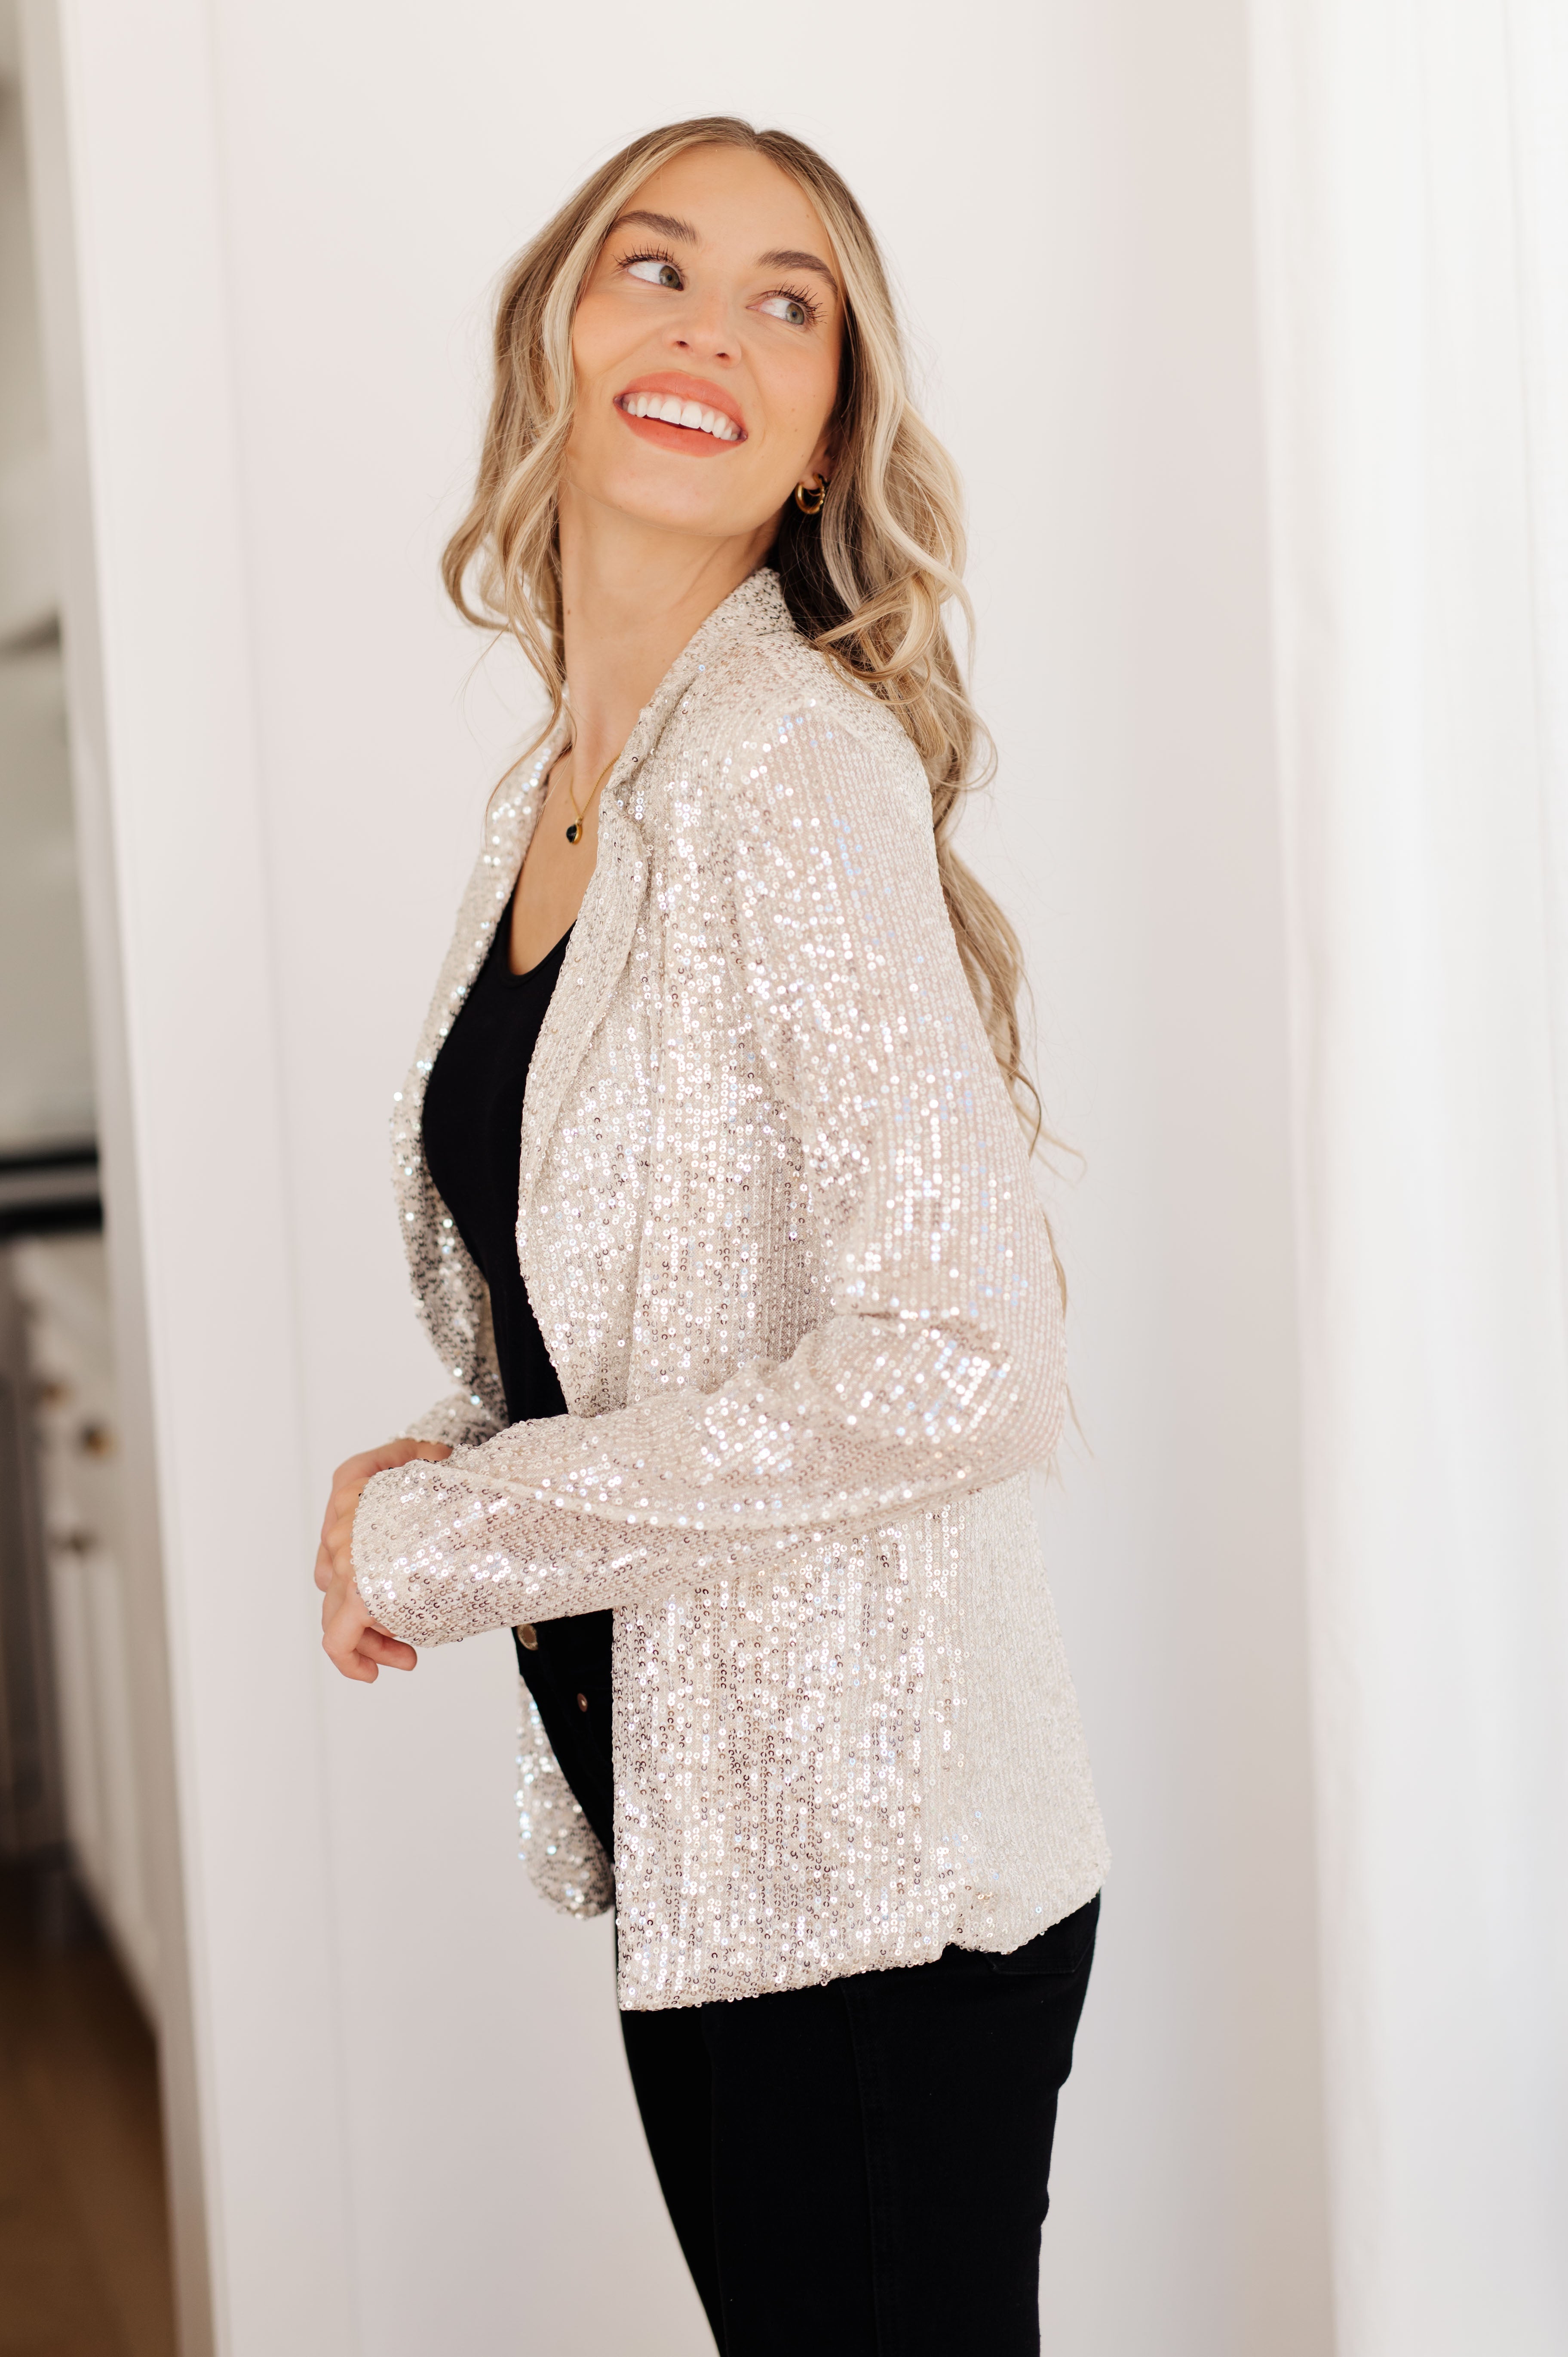 Get Your Glam On Sequin Blazer in Silver